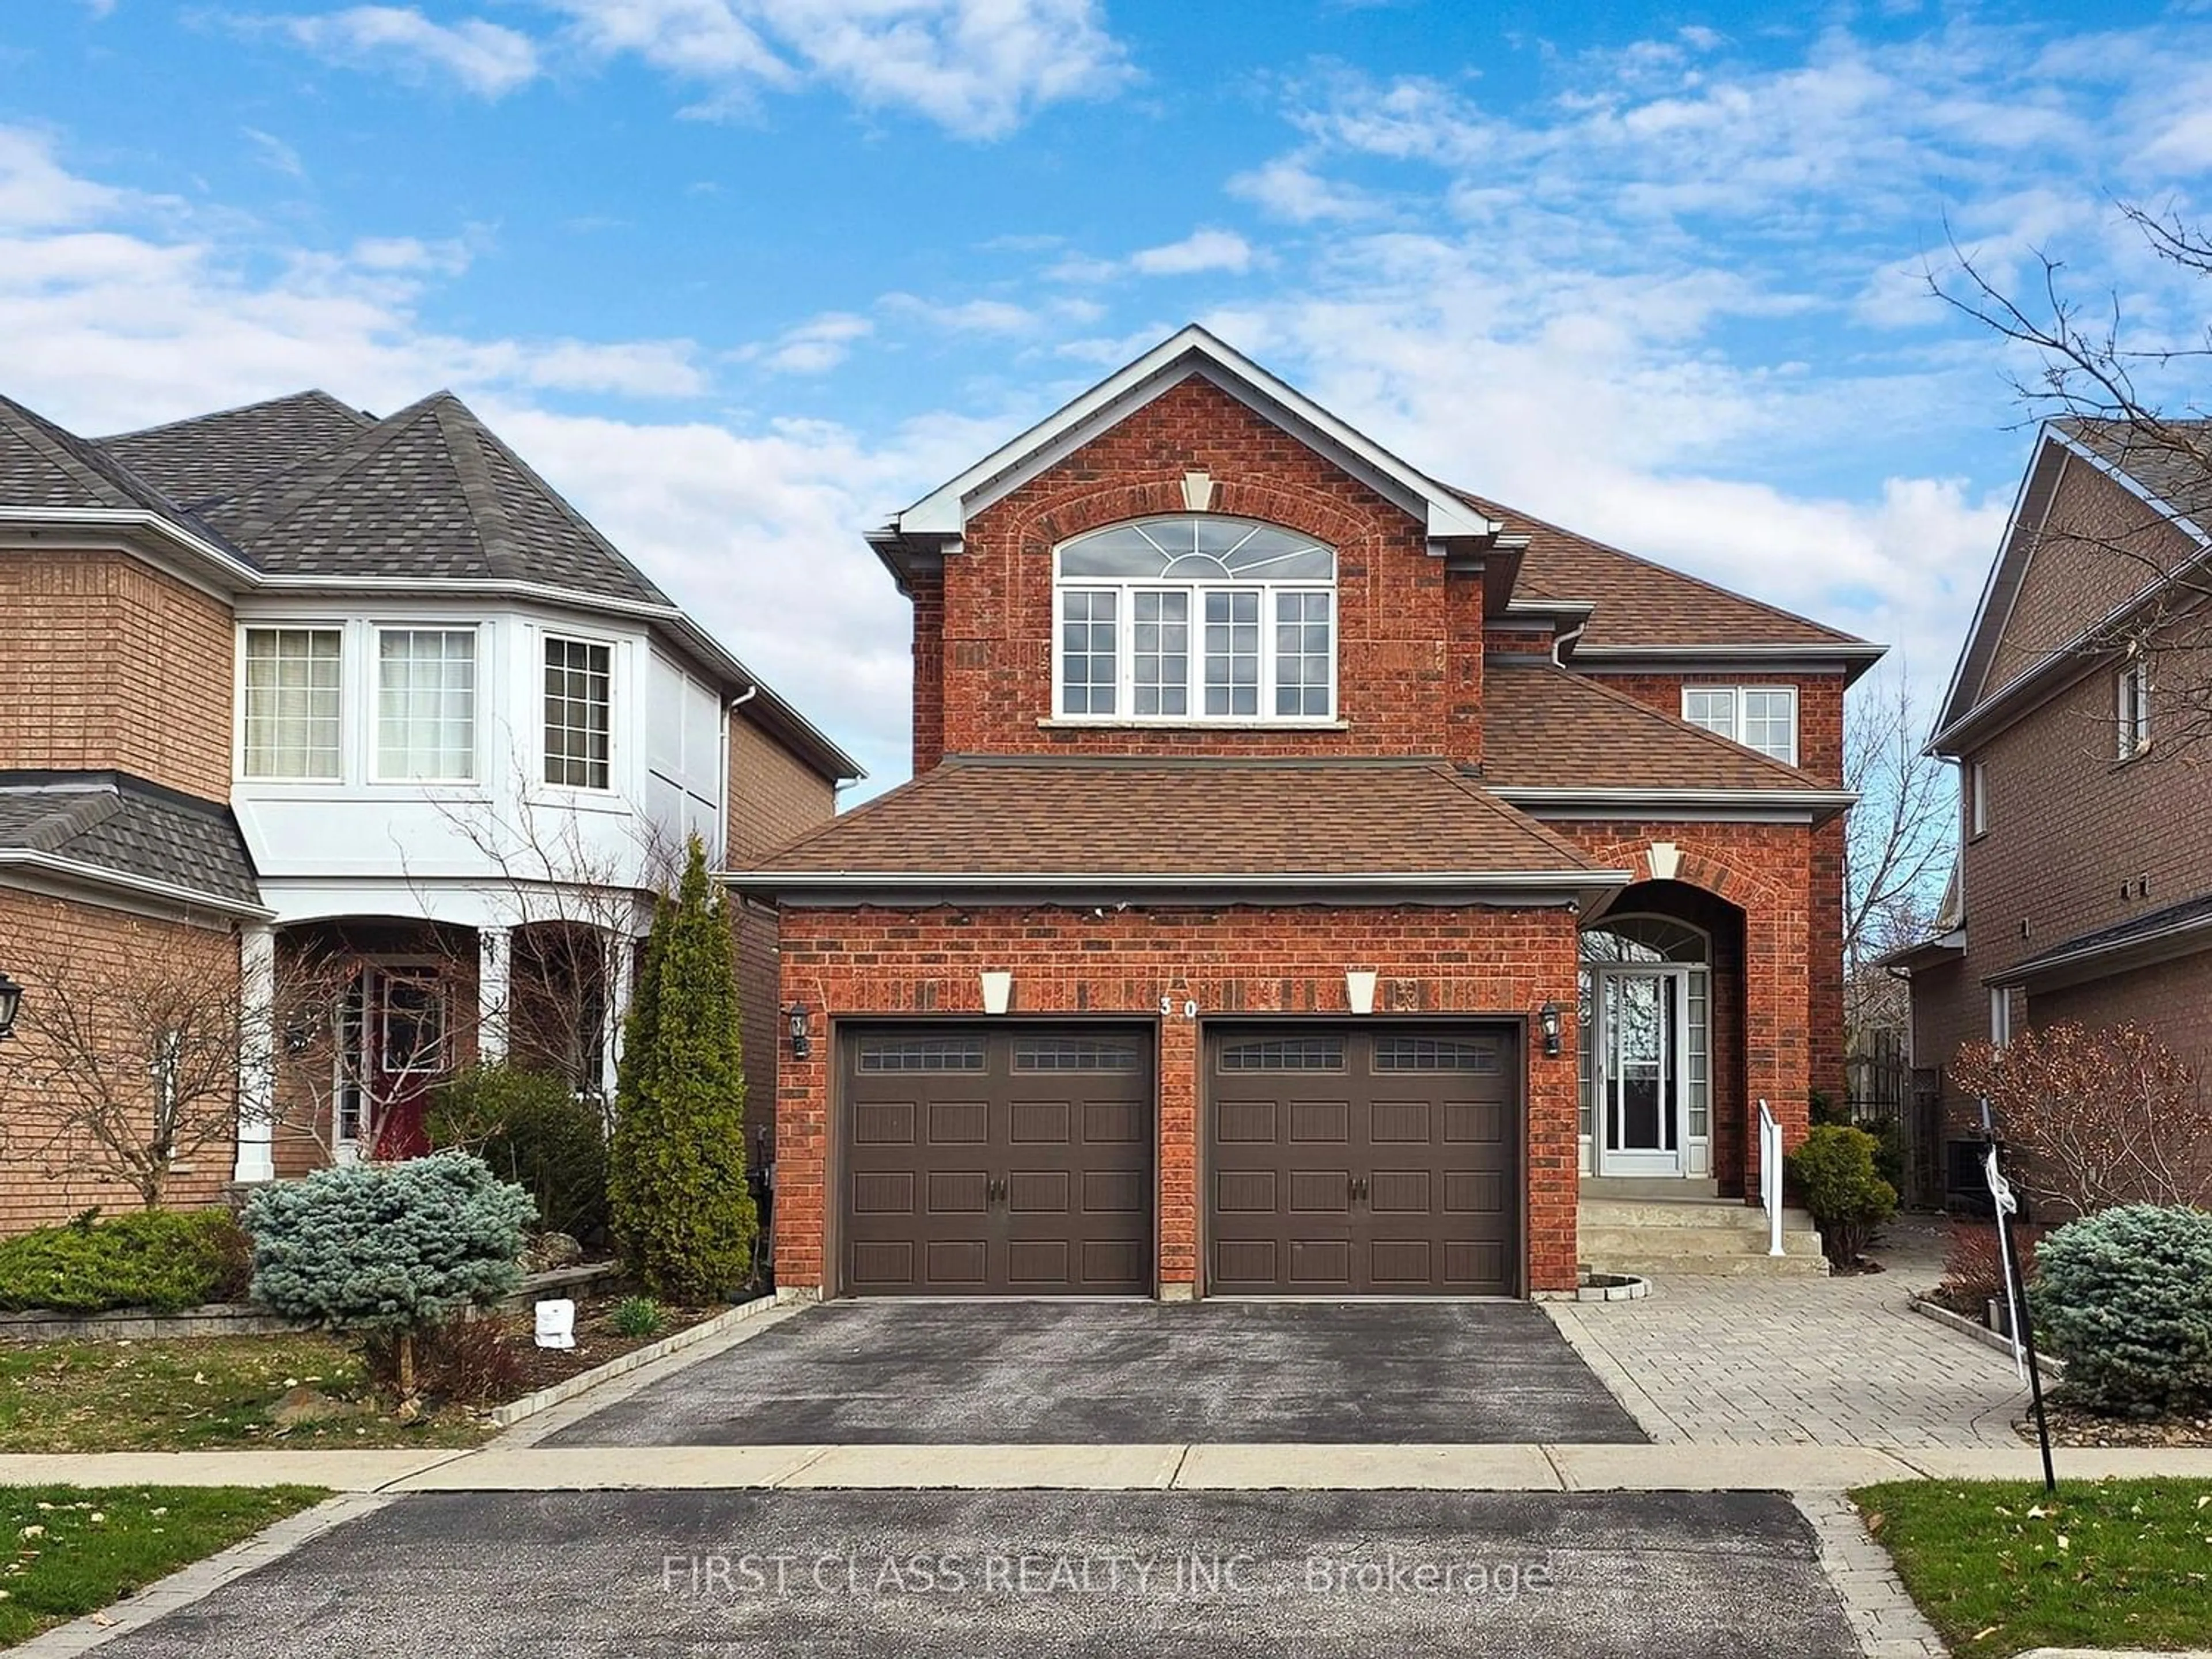 Home with brick exterior material for 30 Kaitlin Dr, Richmond Hill Ontario L4E 3W6